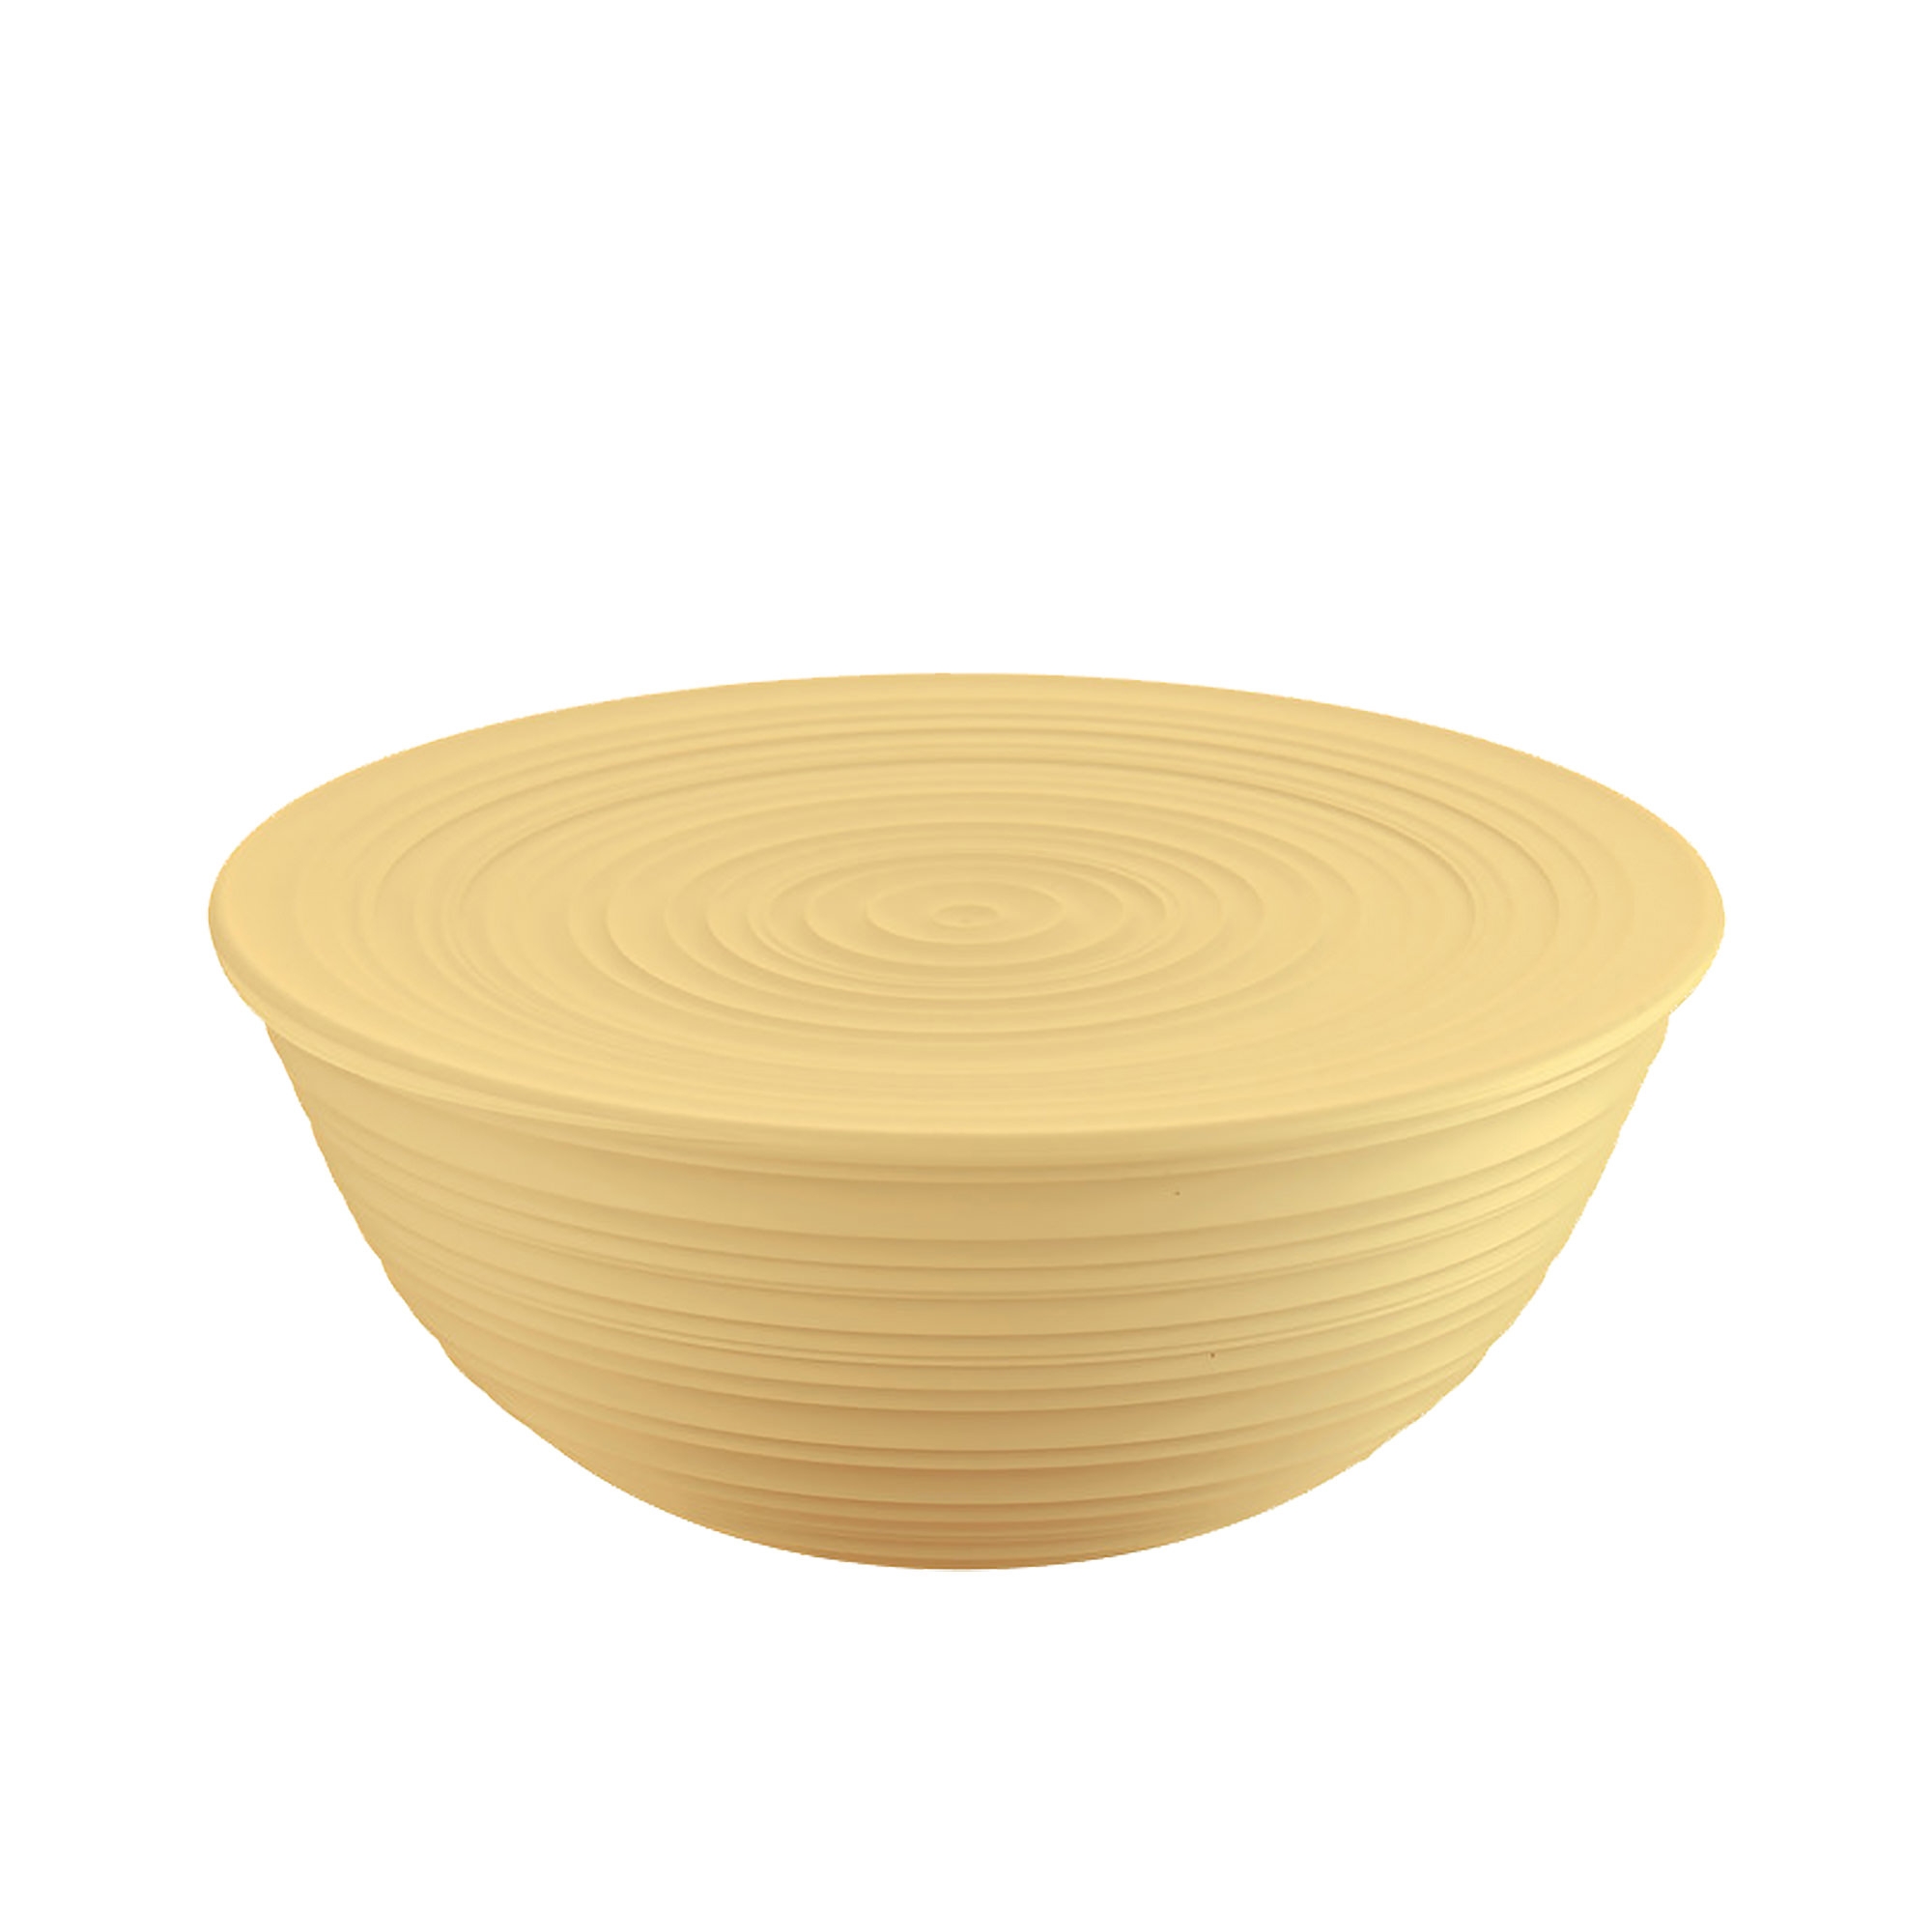 Guzzini Earth Tierra Bowl with Lid Large Mustard Yellow Image 1